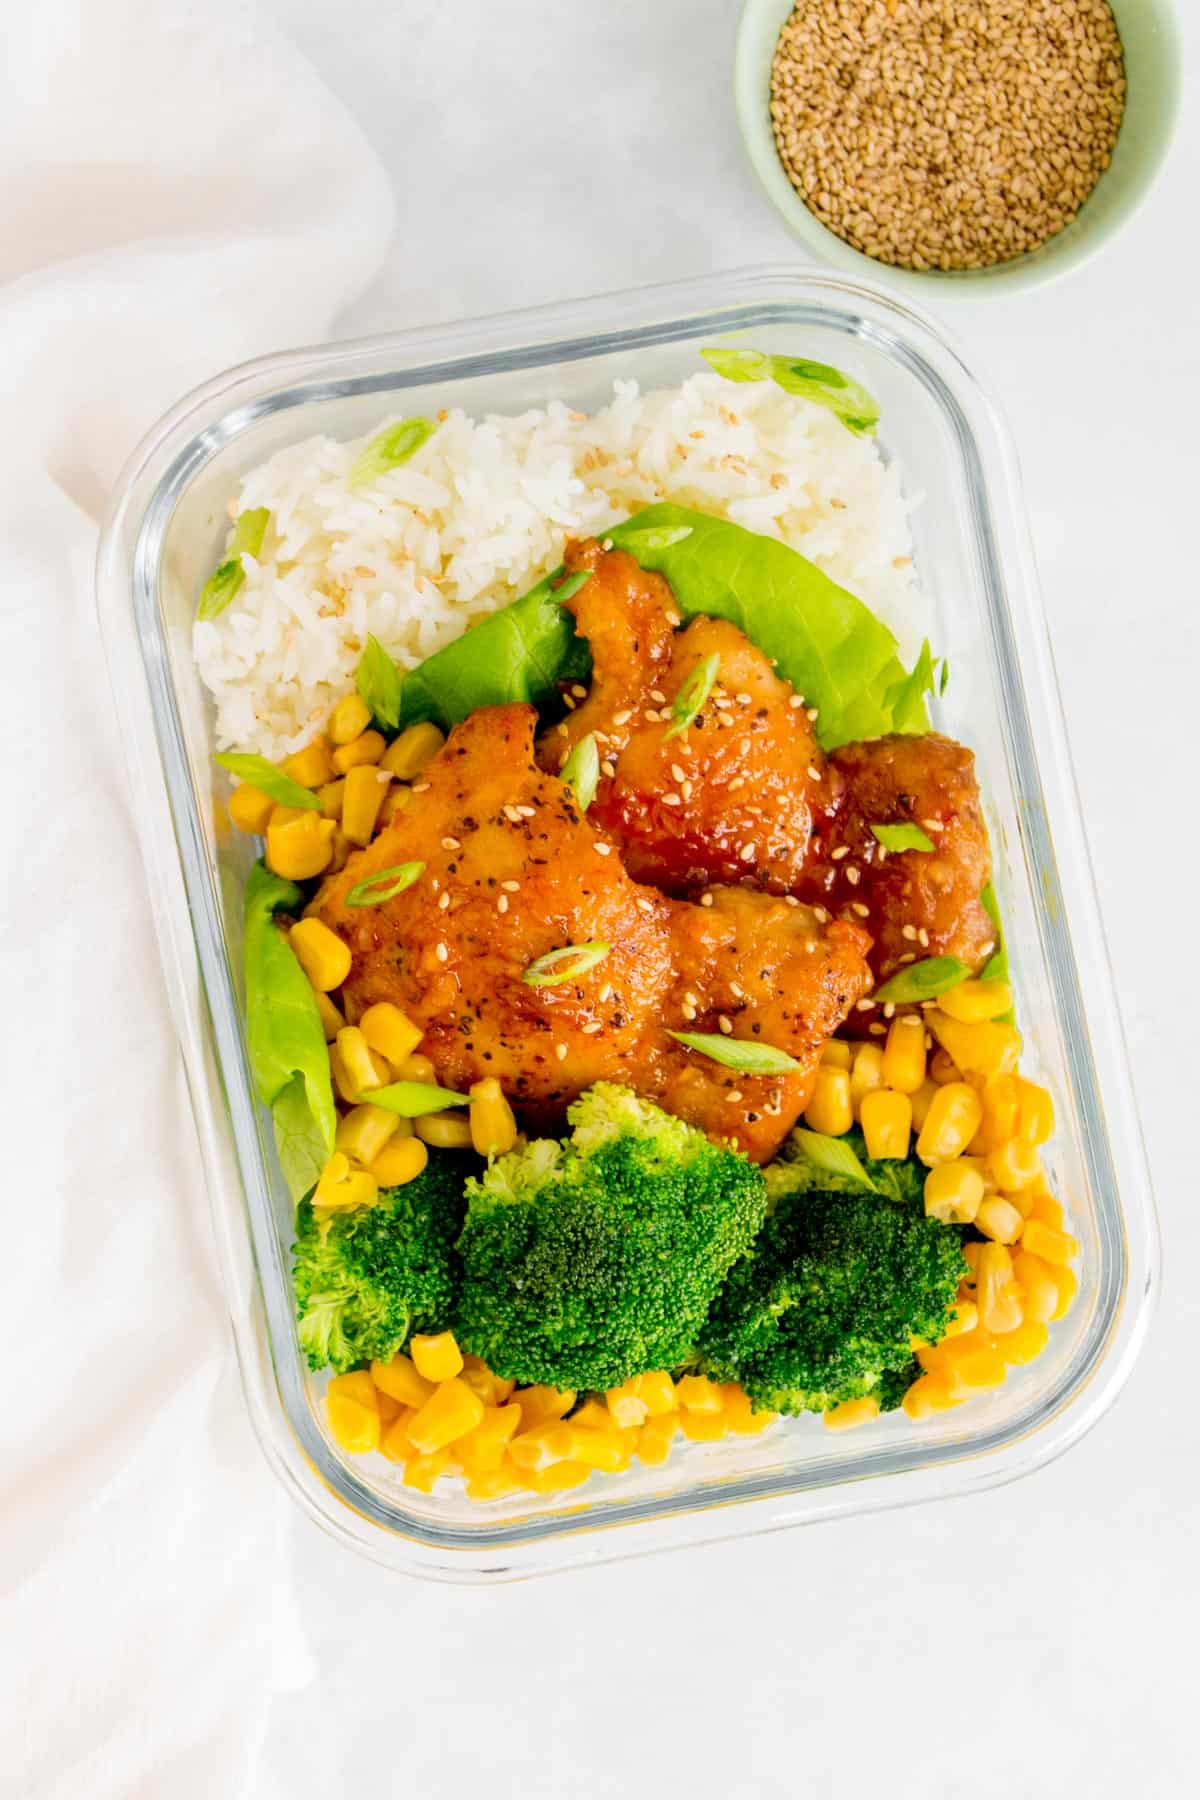 Meal prep container of chicken thighs with rice, corn, and broccoli.